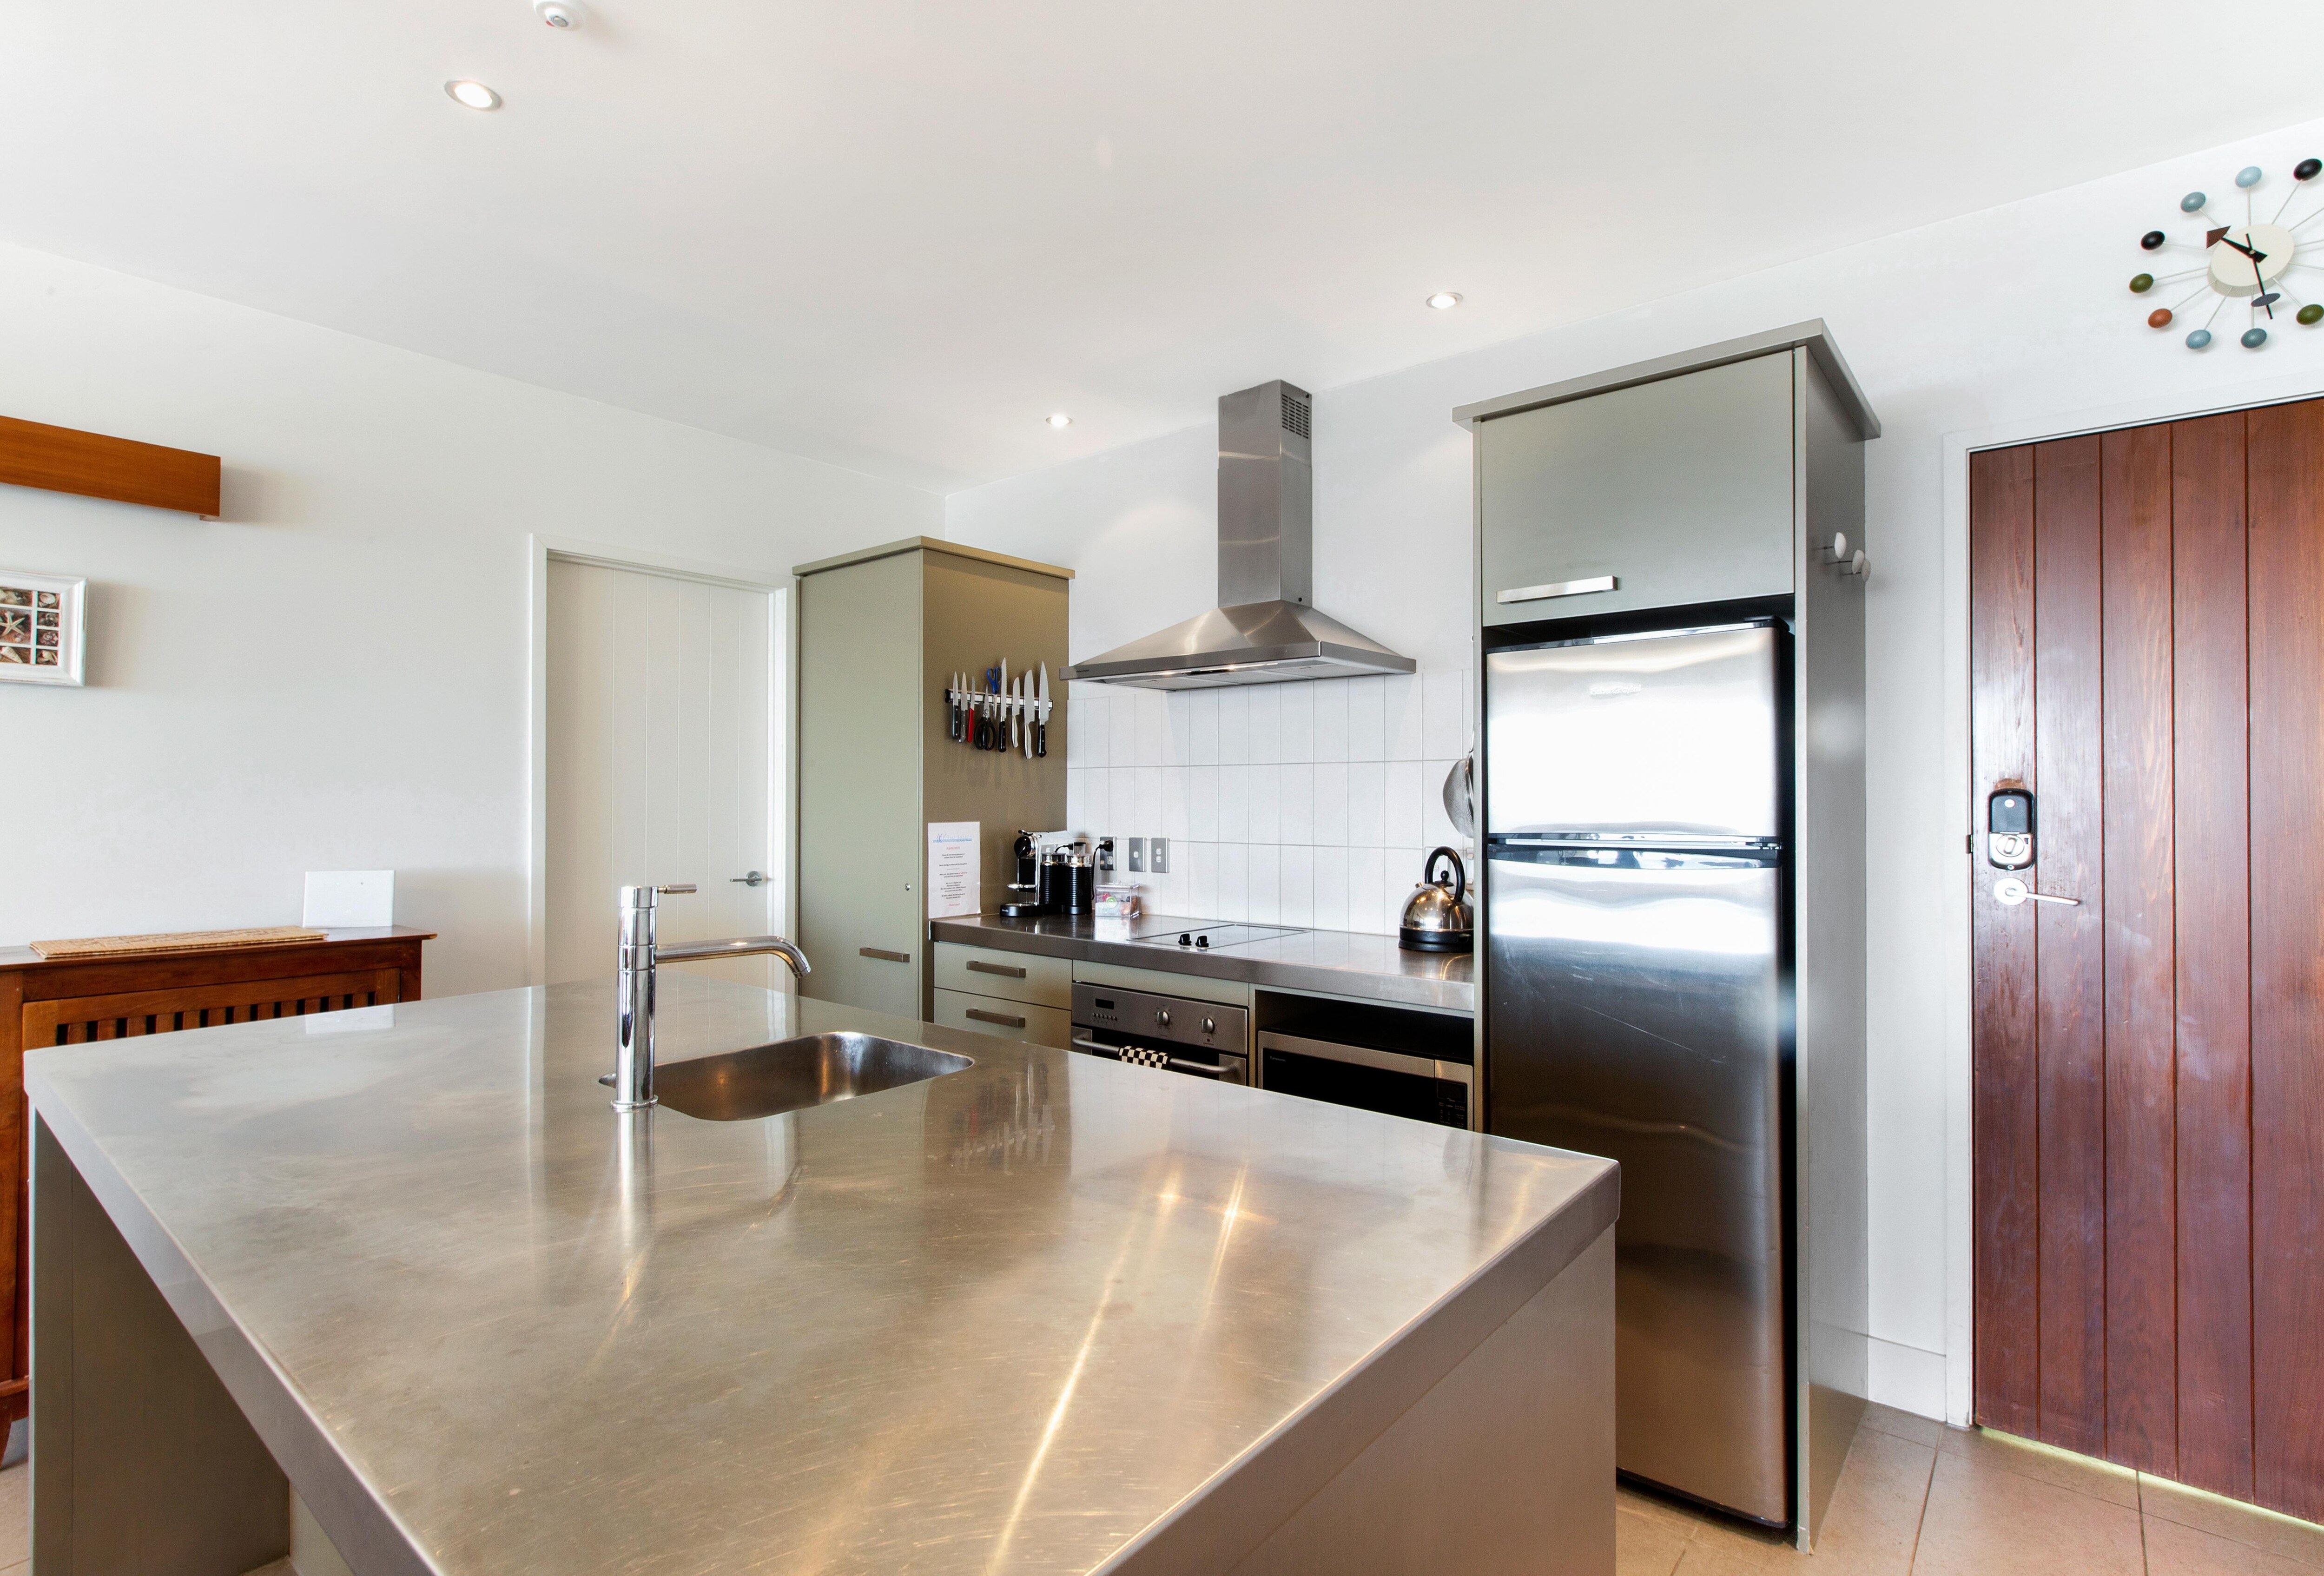 Property Image 2 - Apartment on the Beach - The Sands Unit 21